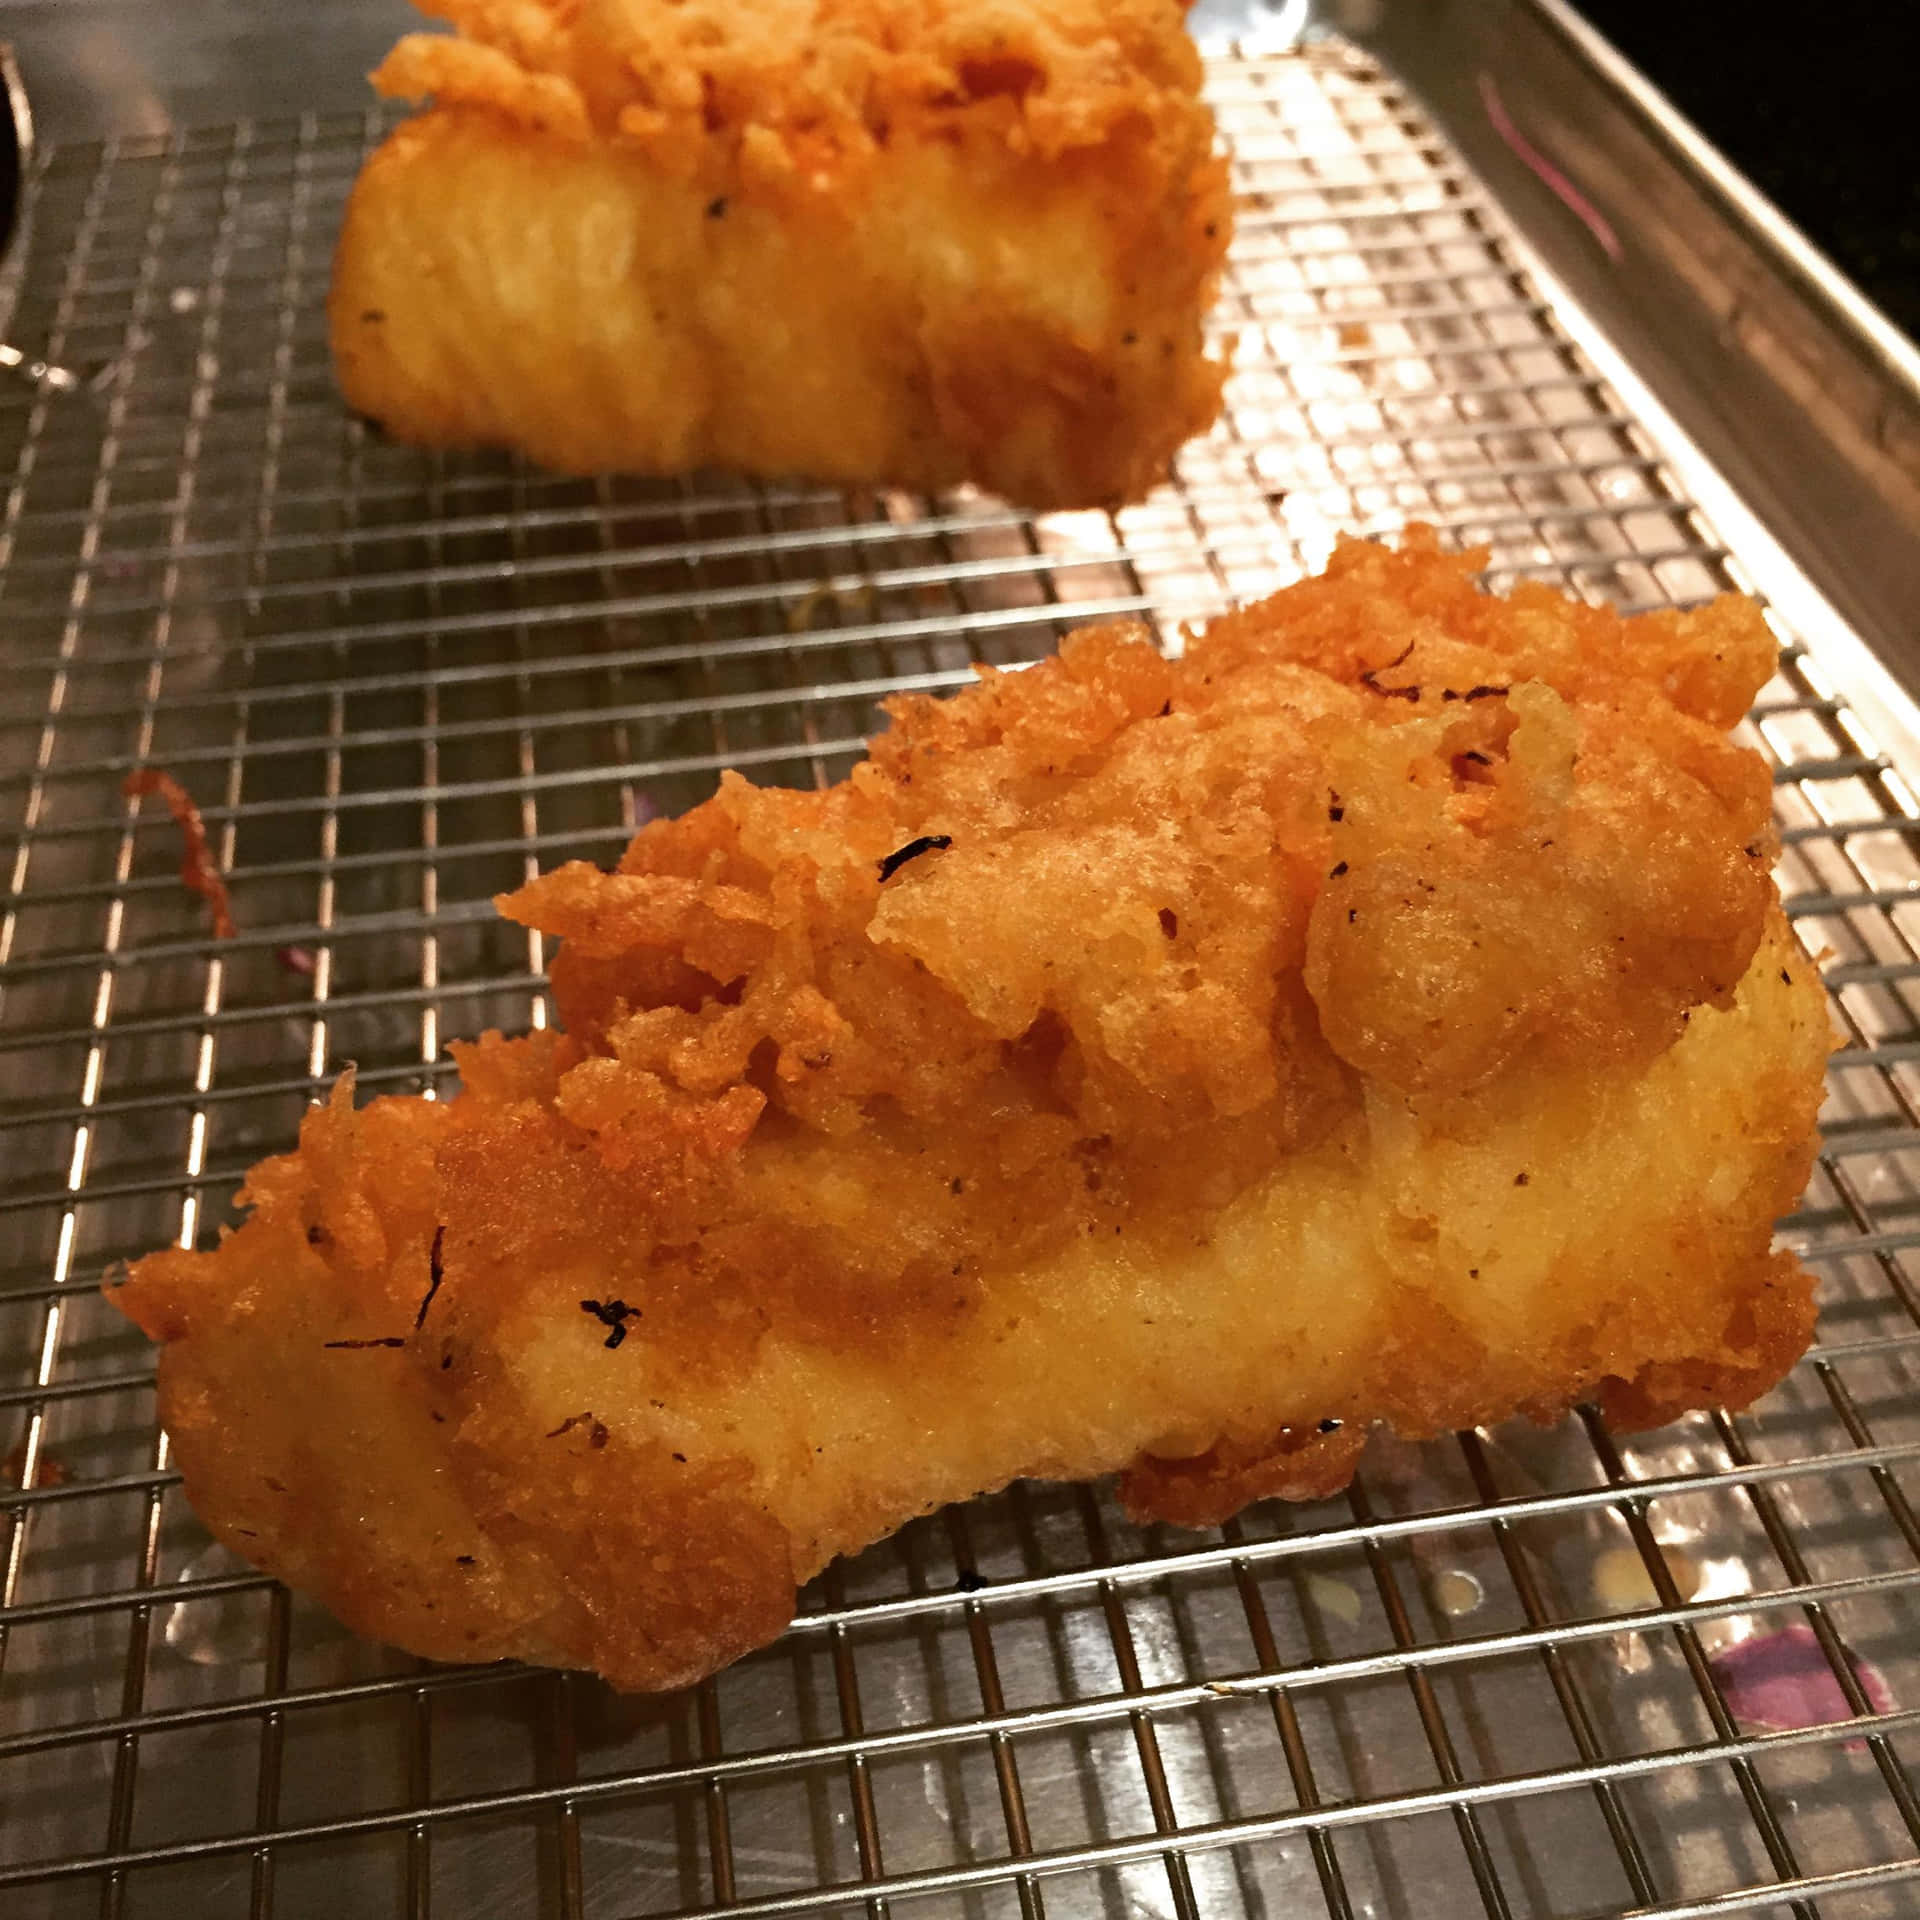 Fried Fish On A Rack